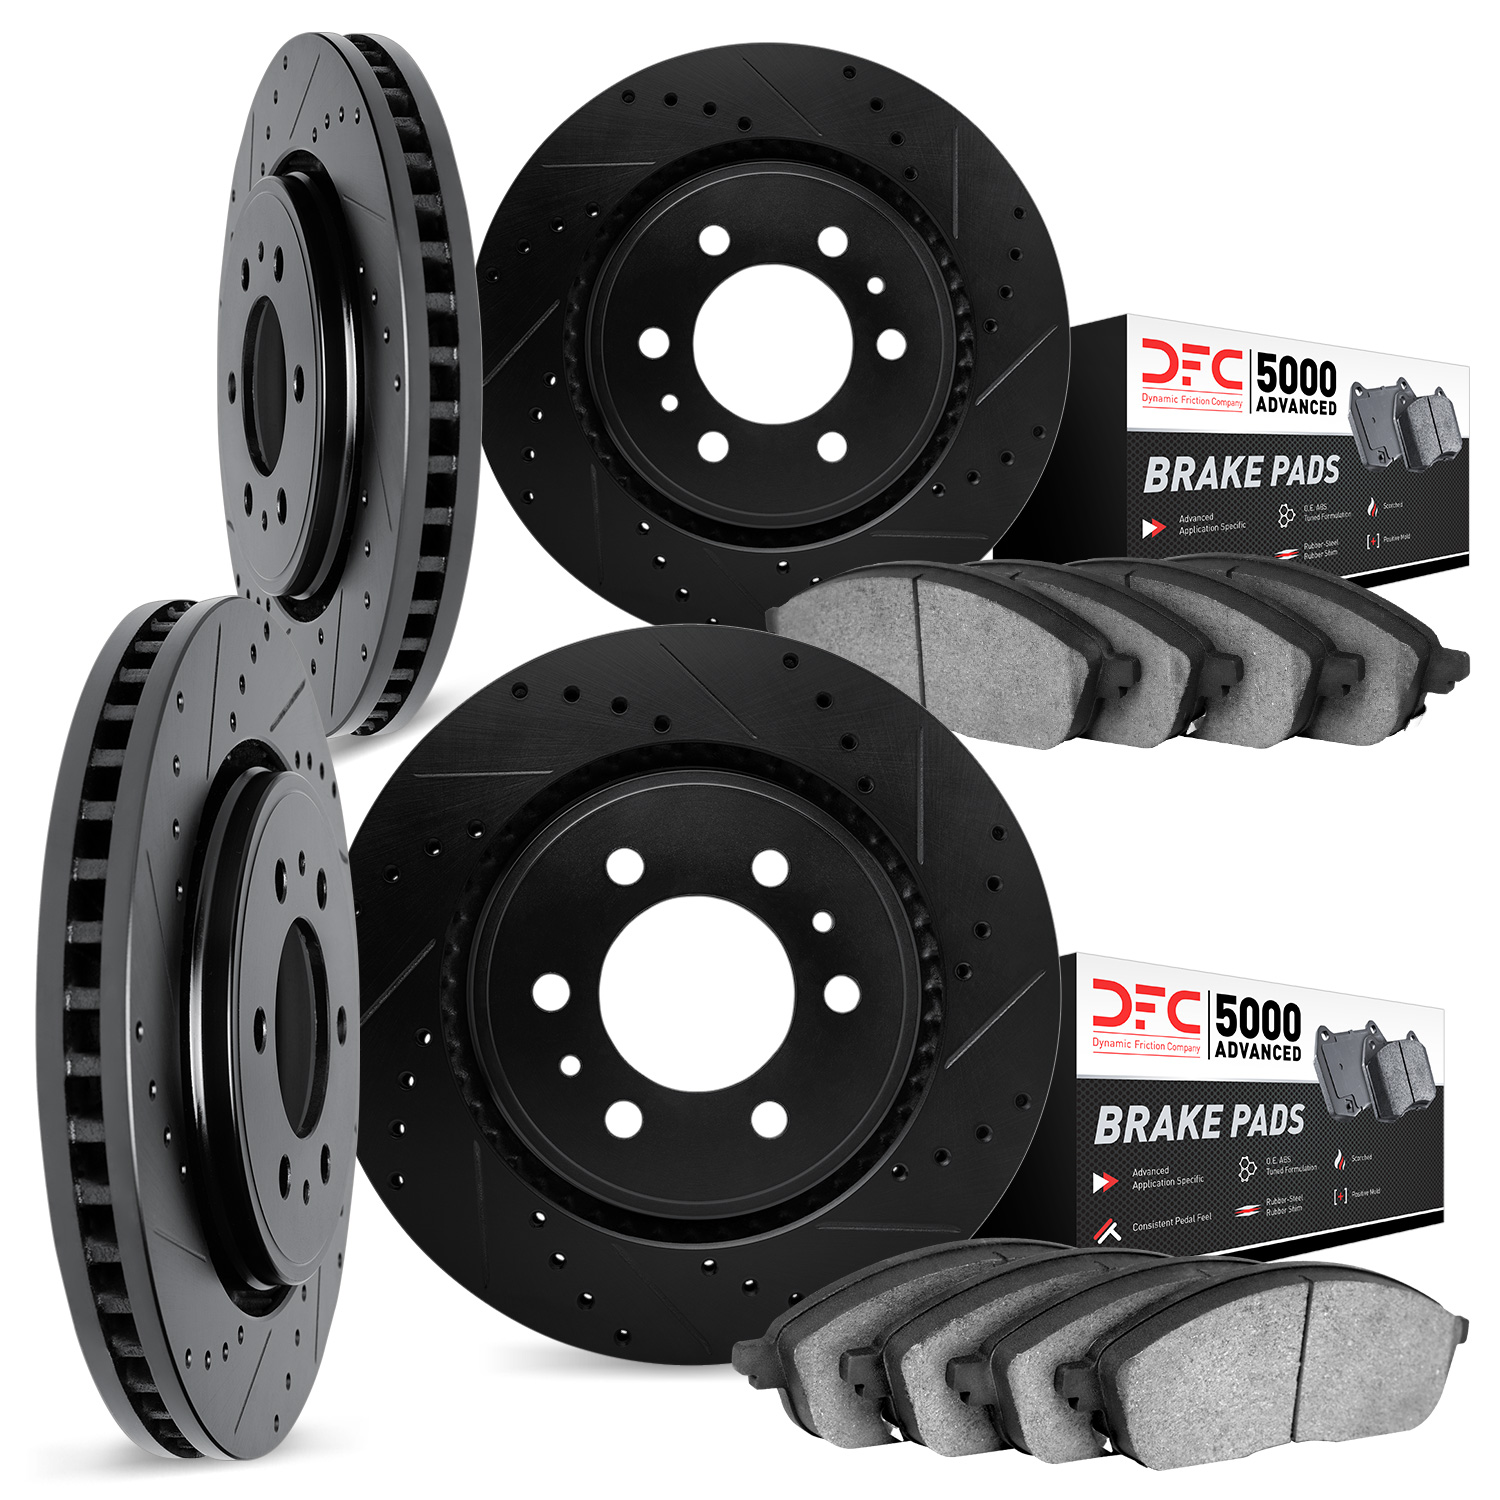 8504-76157 Drilled/Slotted Brake Rotors w/5000 Advanced Brake Pads Kit [Black], 2001-2002 Lexus/Toyota/Scion, Position: Front an